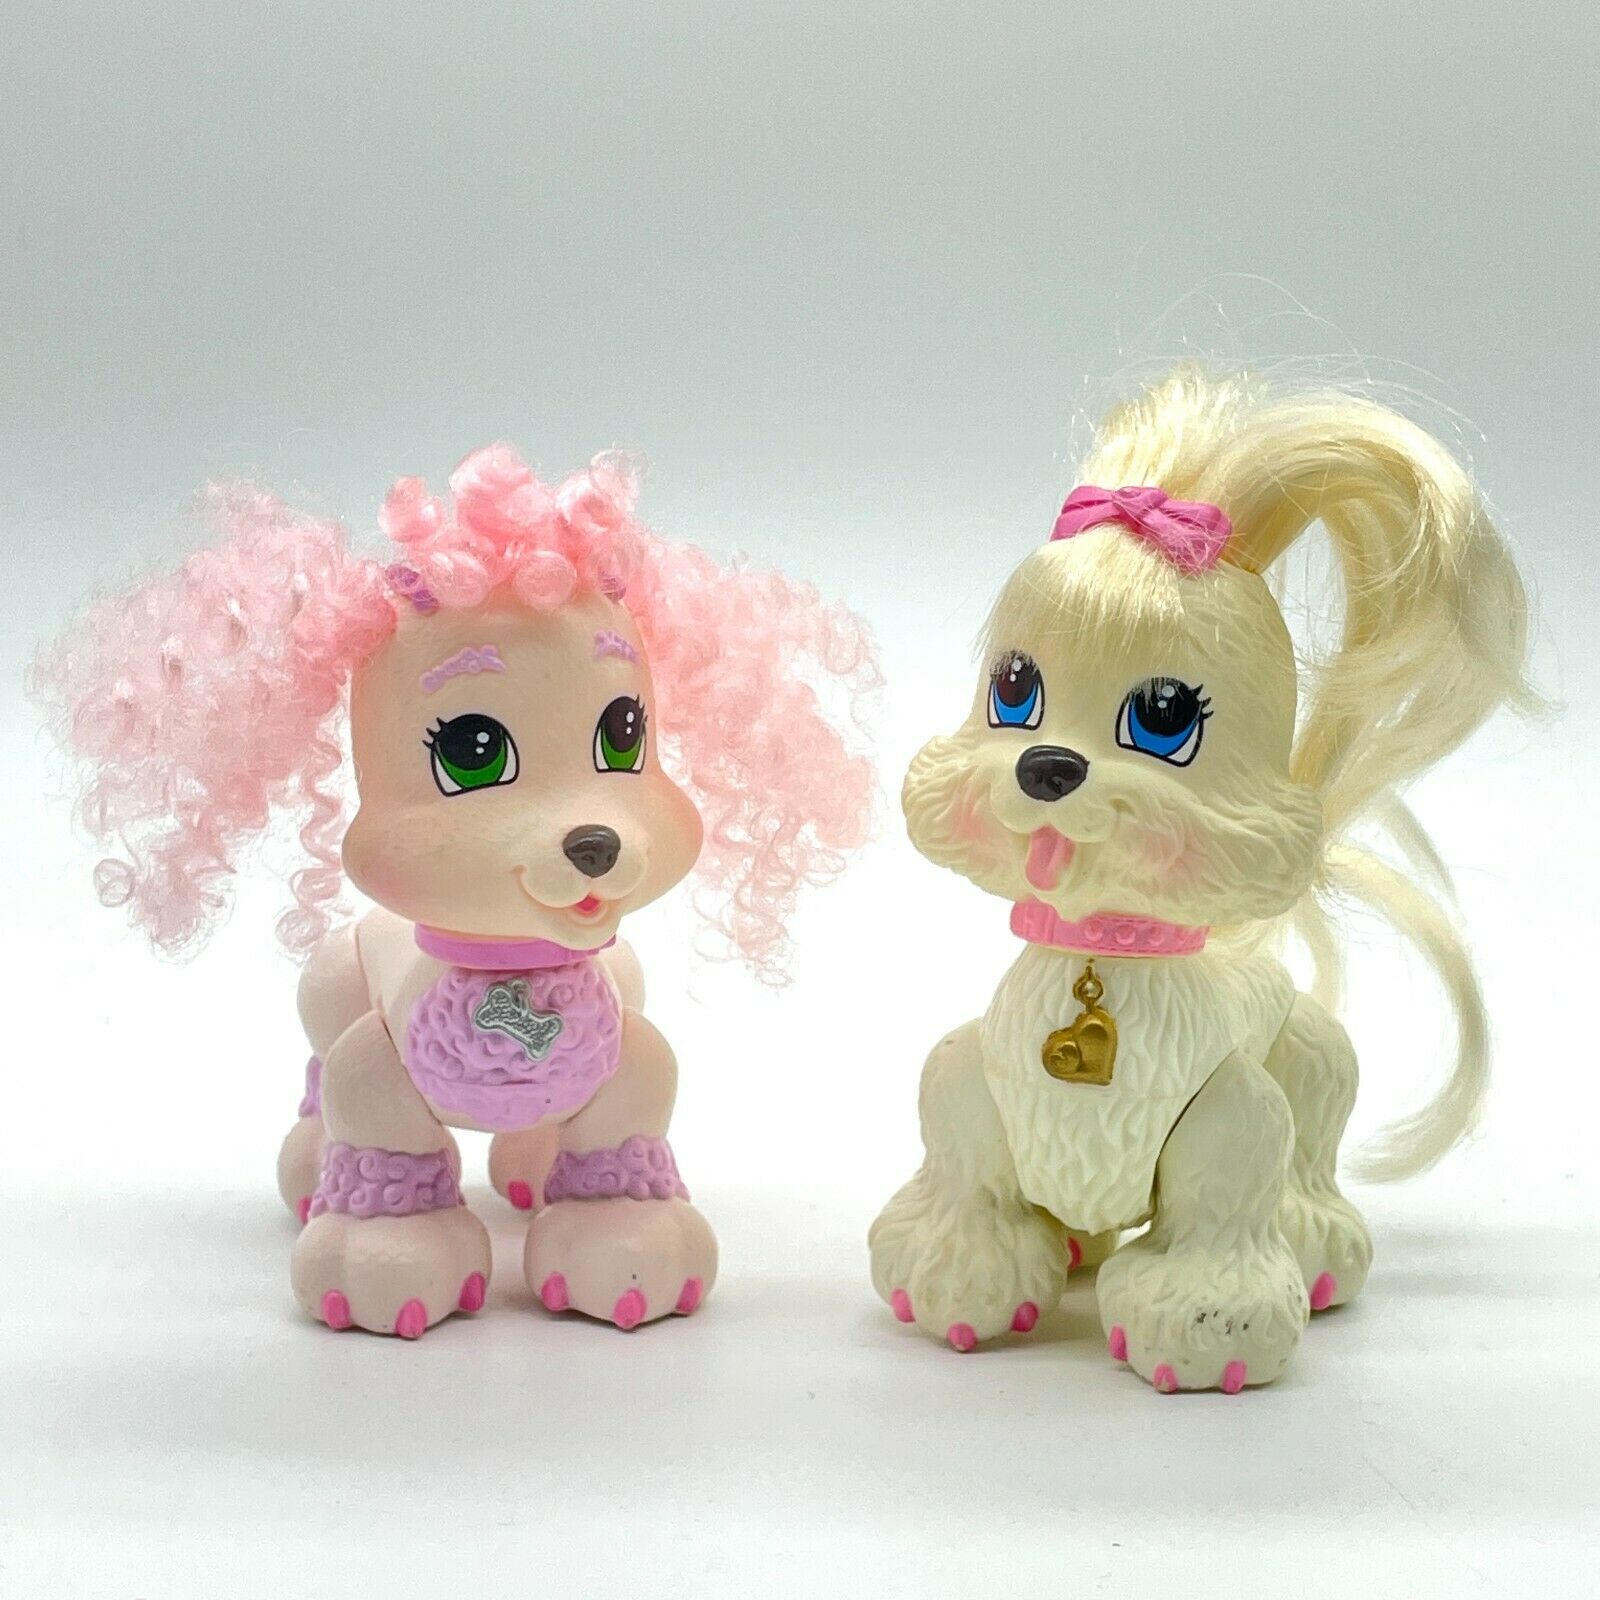 Fisher Price Snap N Style Pets Shihtzu Poodle 4" Puppies Ginger Lot Of 2 Figures